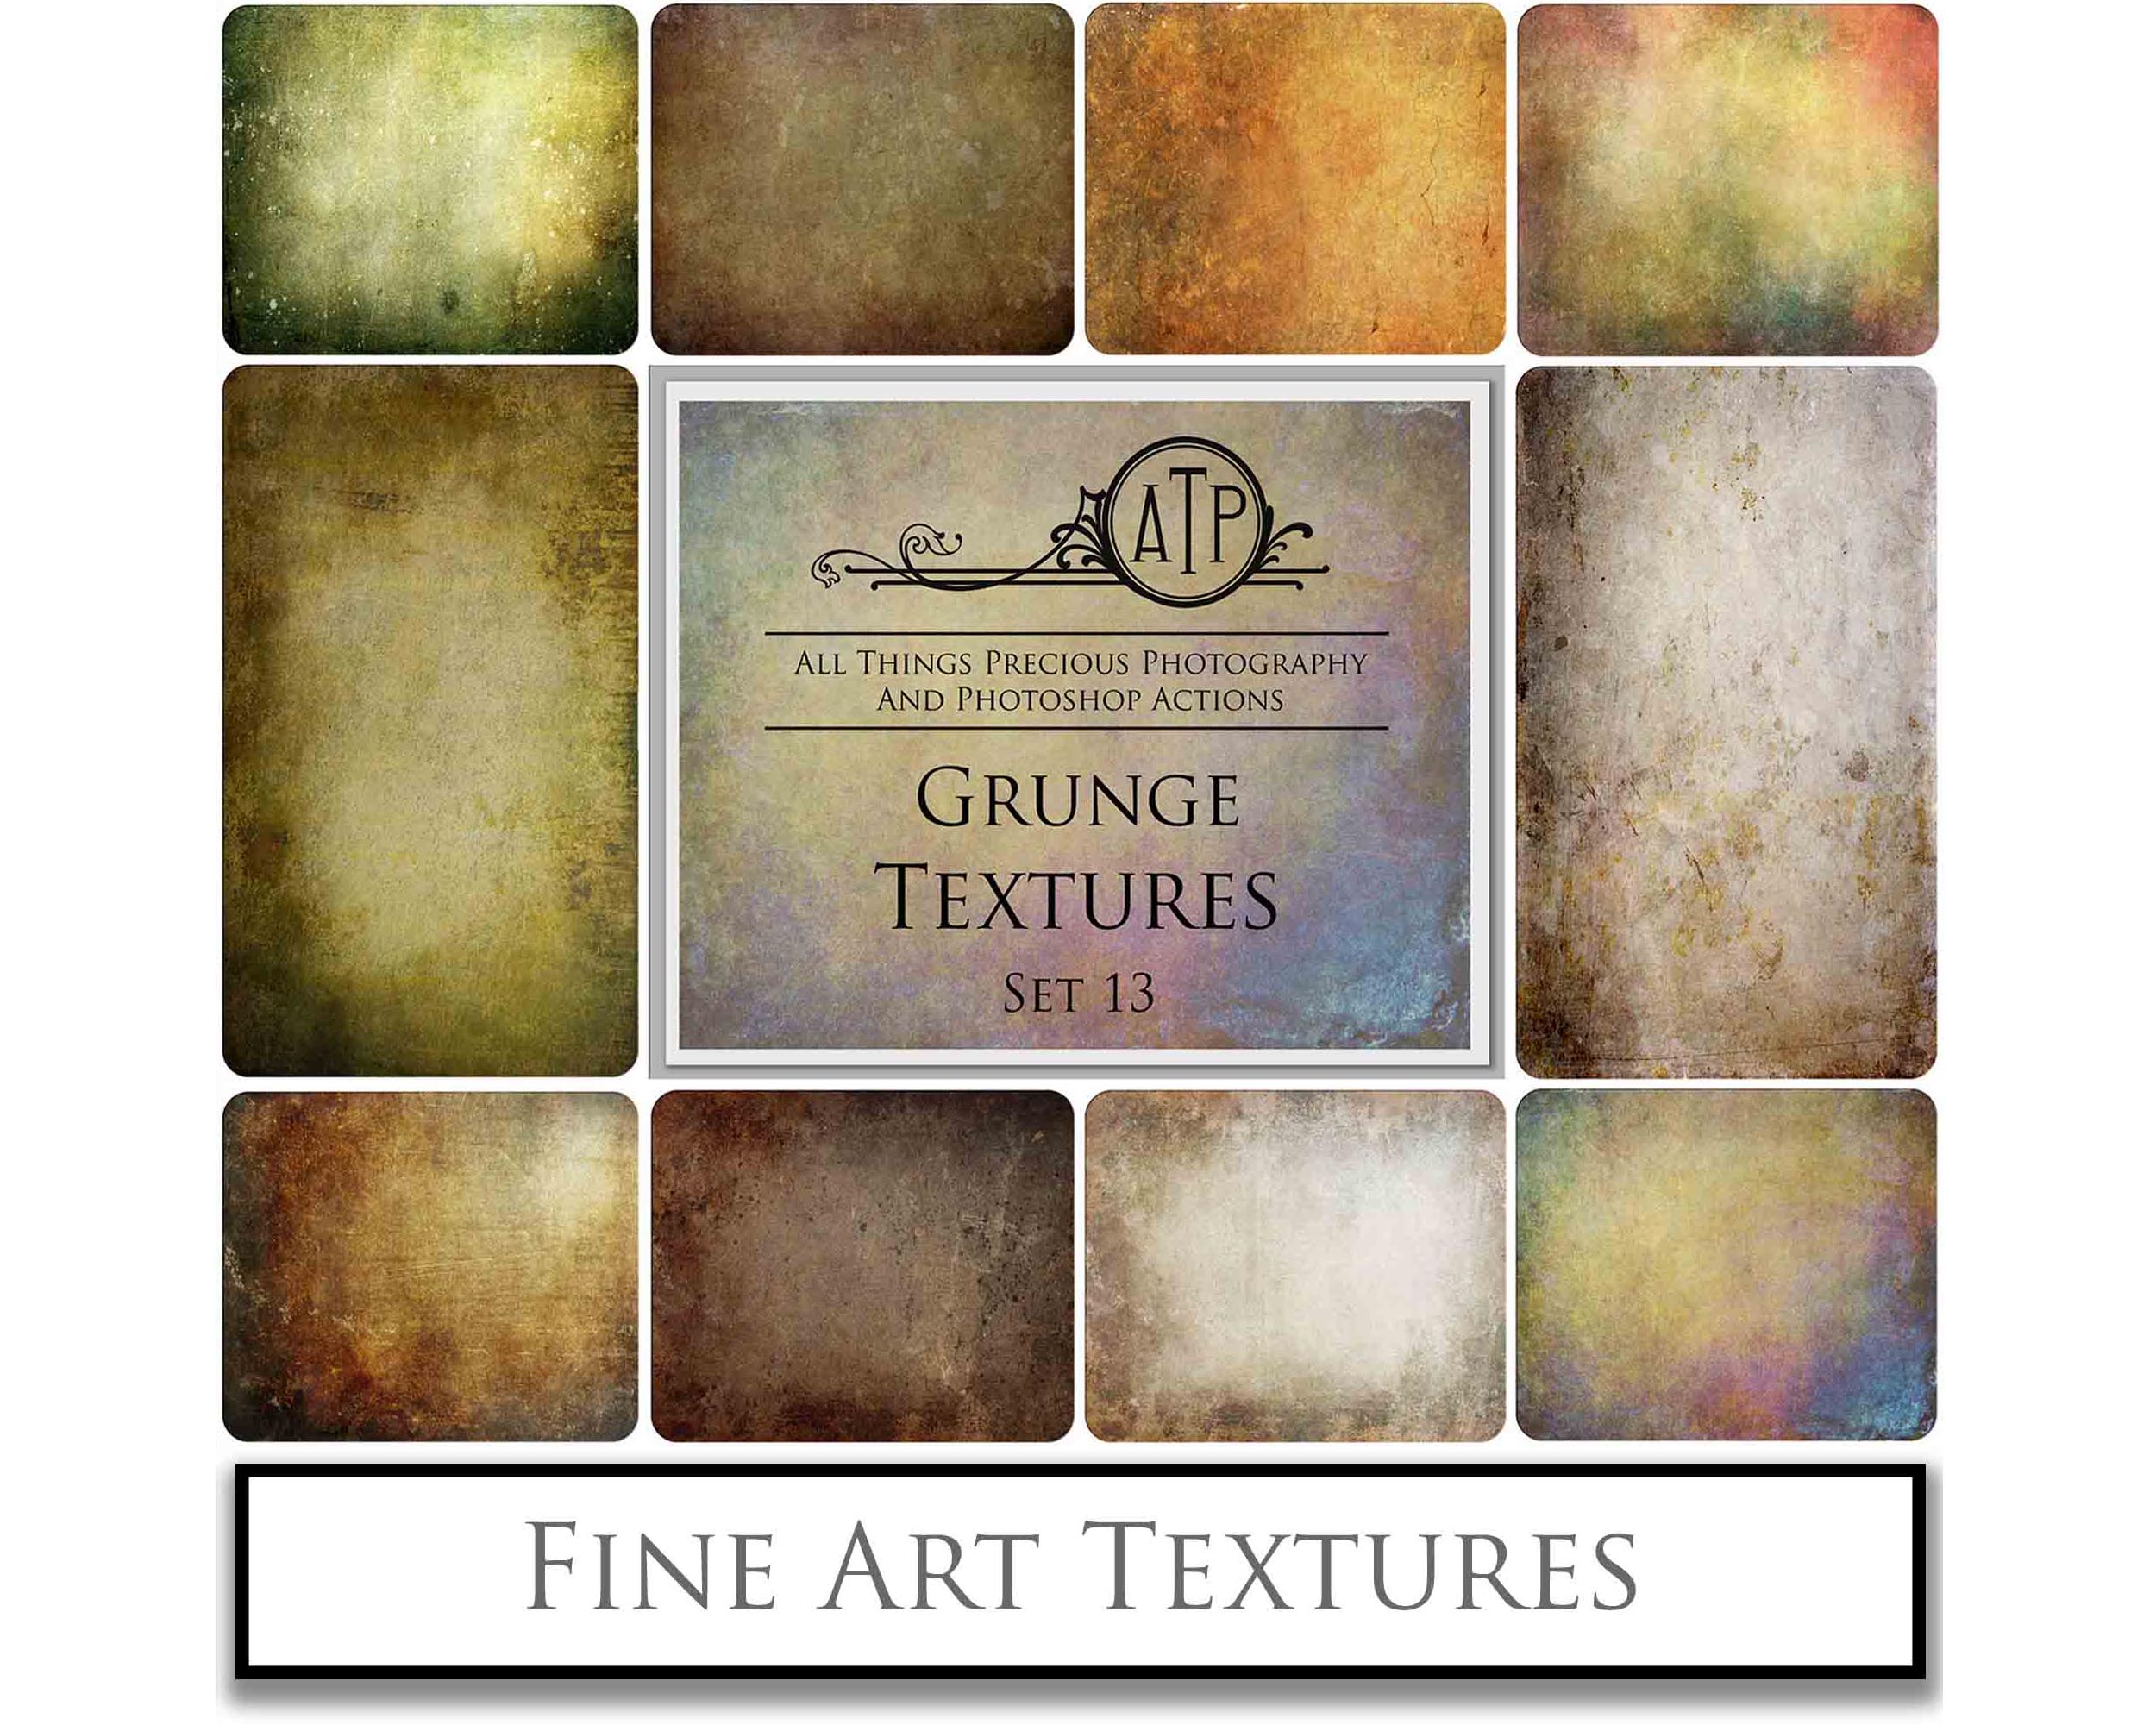 Fine art textures. Rich, Nature colour tints. Texture for photographers and digital editing. Photo Overlays. Antique, Vintage, Grunge, Light, Dark Bundle. Textured printable Canvas, Colour, Monochrome, Bundle. High resolution, 300dpi Graphic Assets for photography, digital scrapbooking and design. By ATP Textures